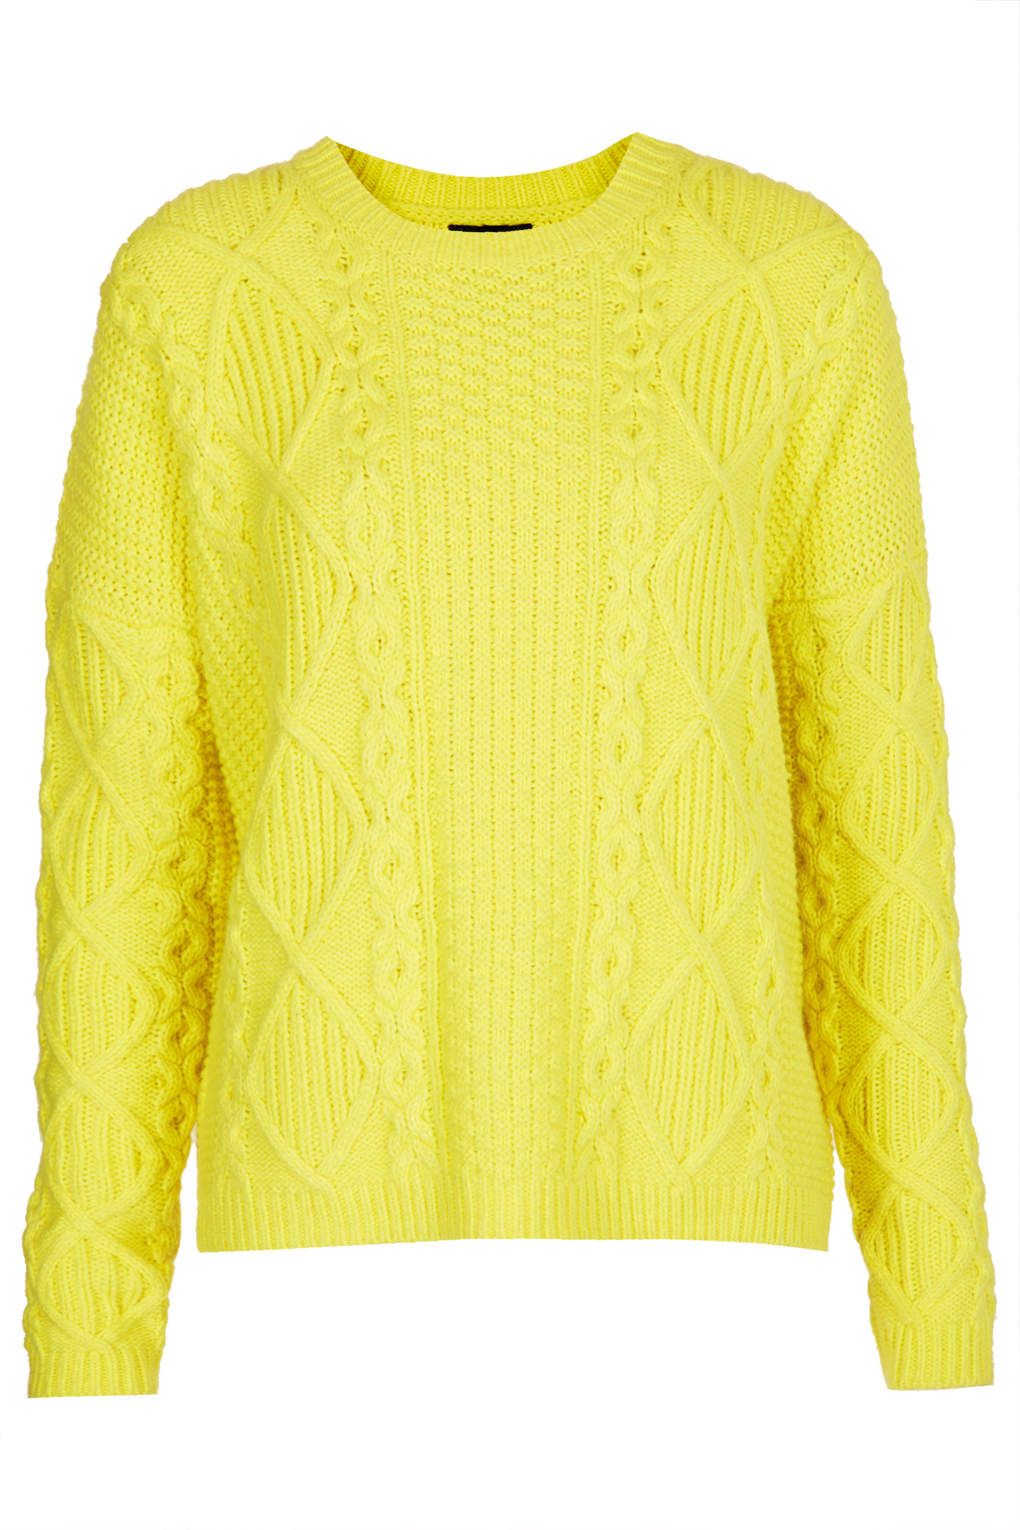 Lyst - Topshop Knitted Angora Cable Jumper in Yellow